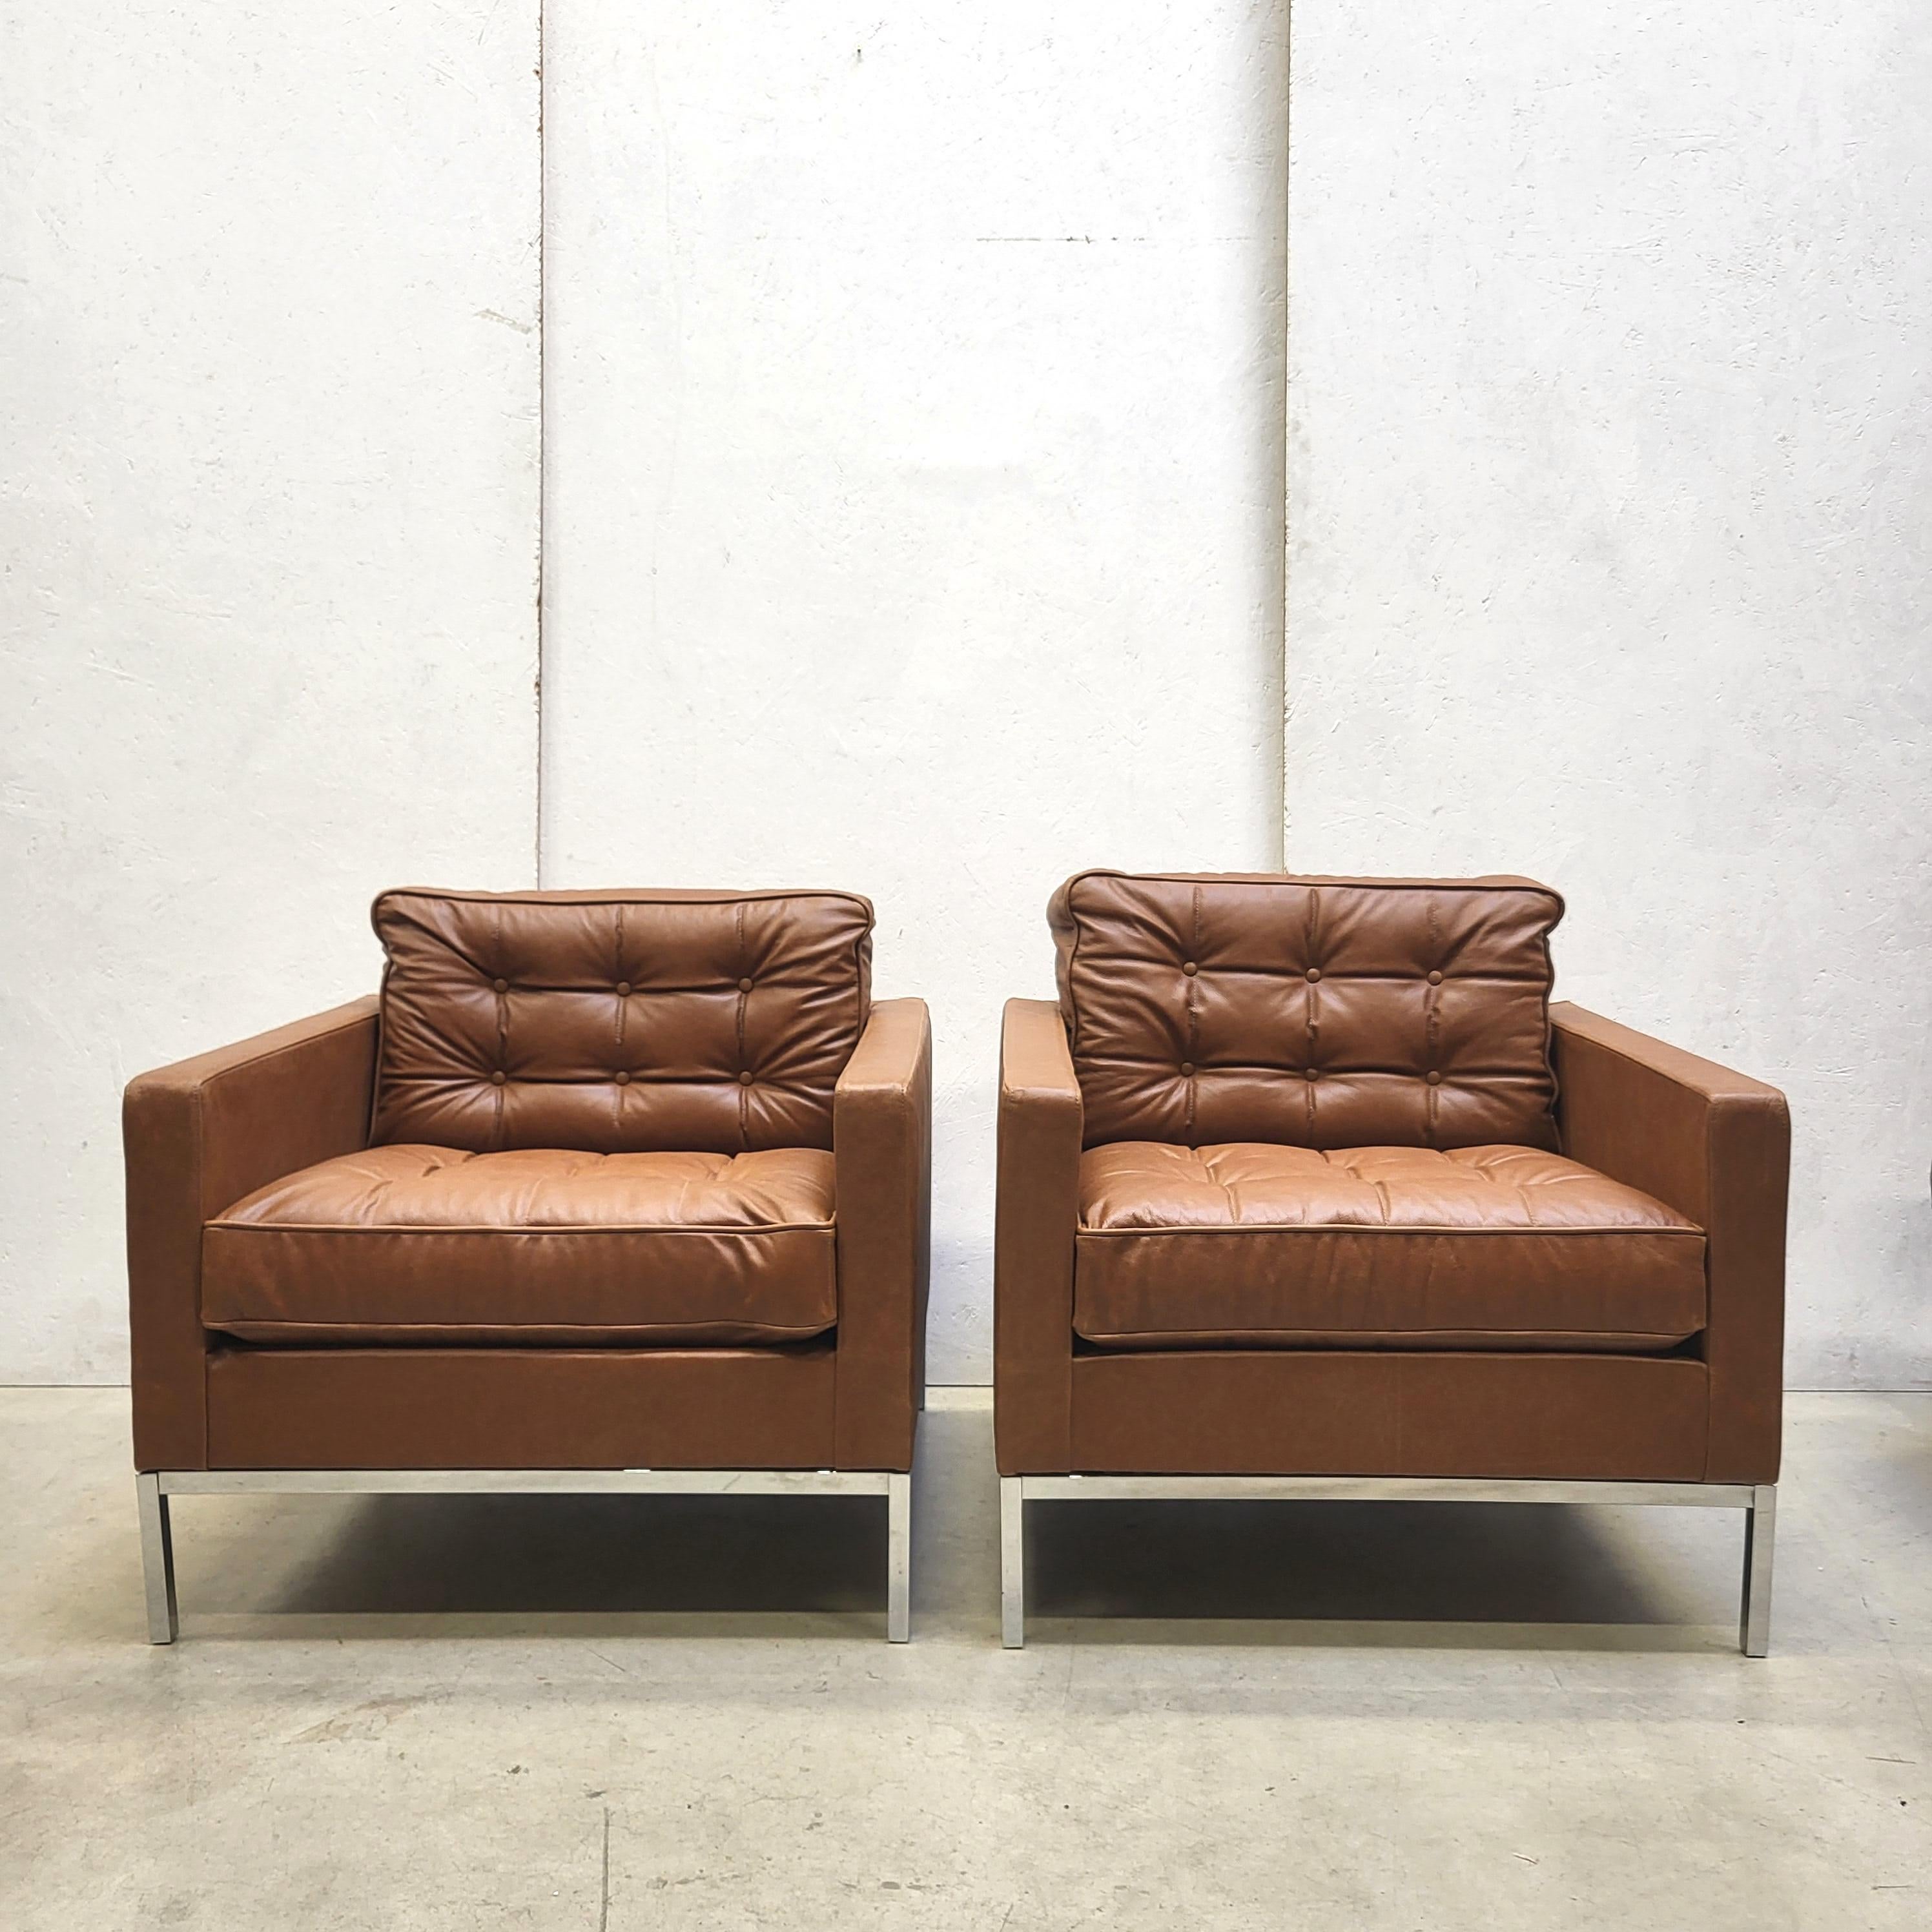 Hand-Crafted 2x 3 Seater Knoll Studio Sofa and 2x Club Chair by Florence Knoll Pine Brown